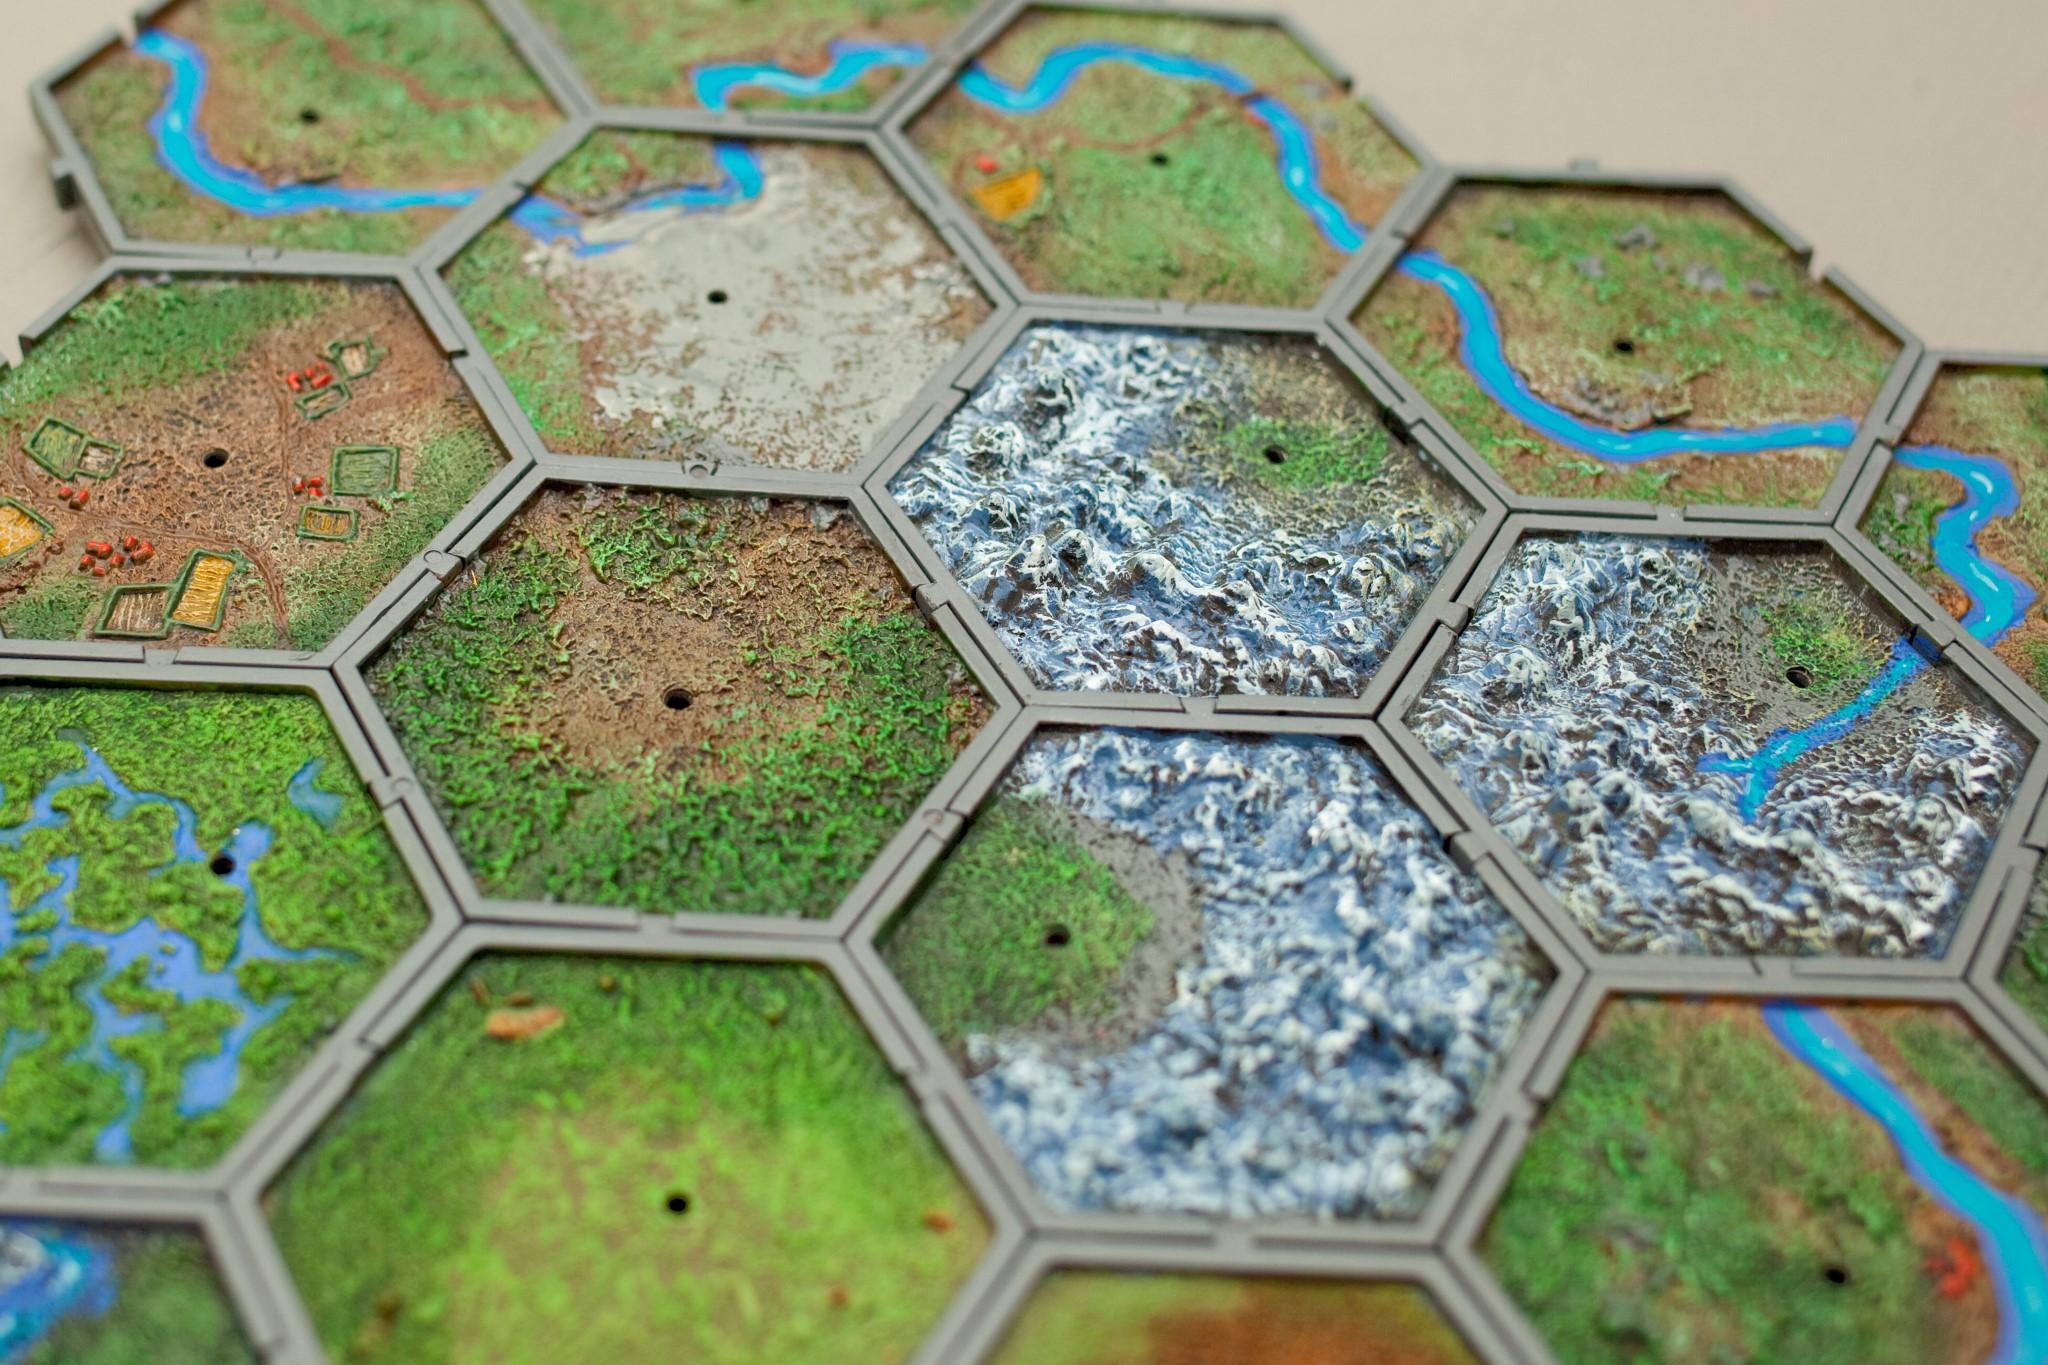 40k Campaign Map Planetary Empires 40k Campaign Map Planetary Empires